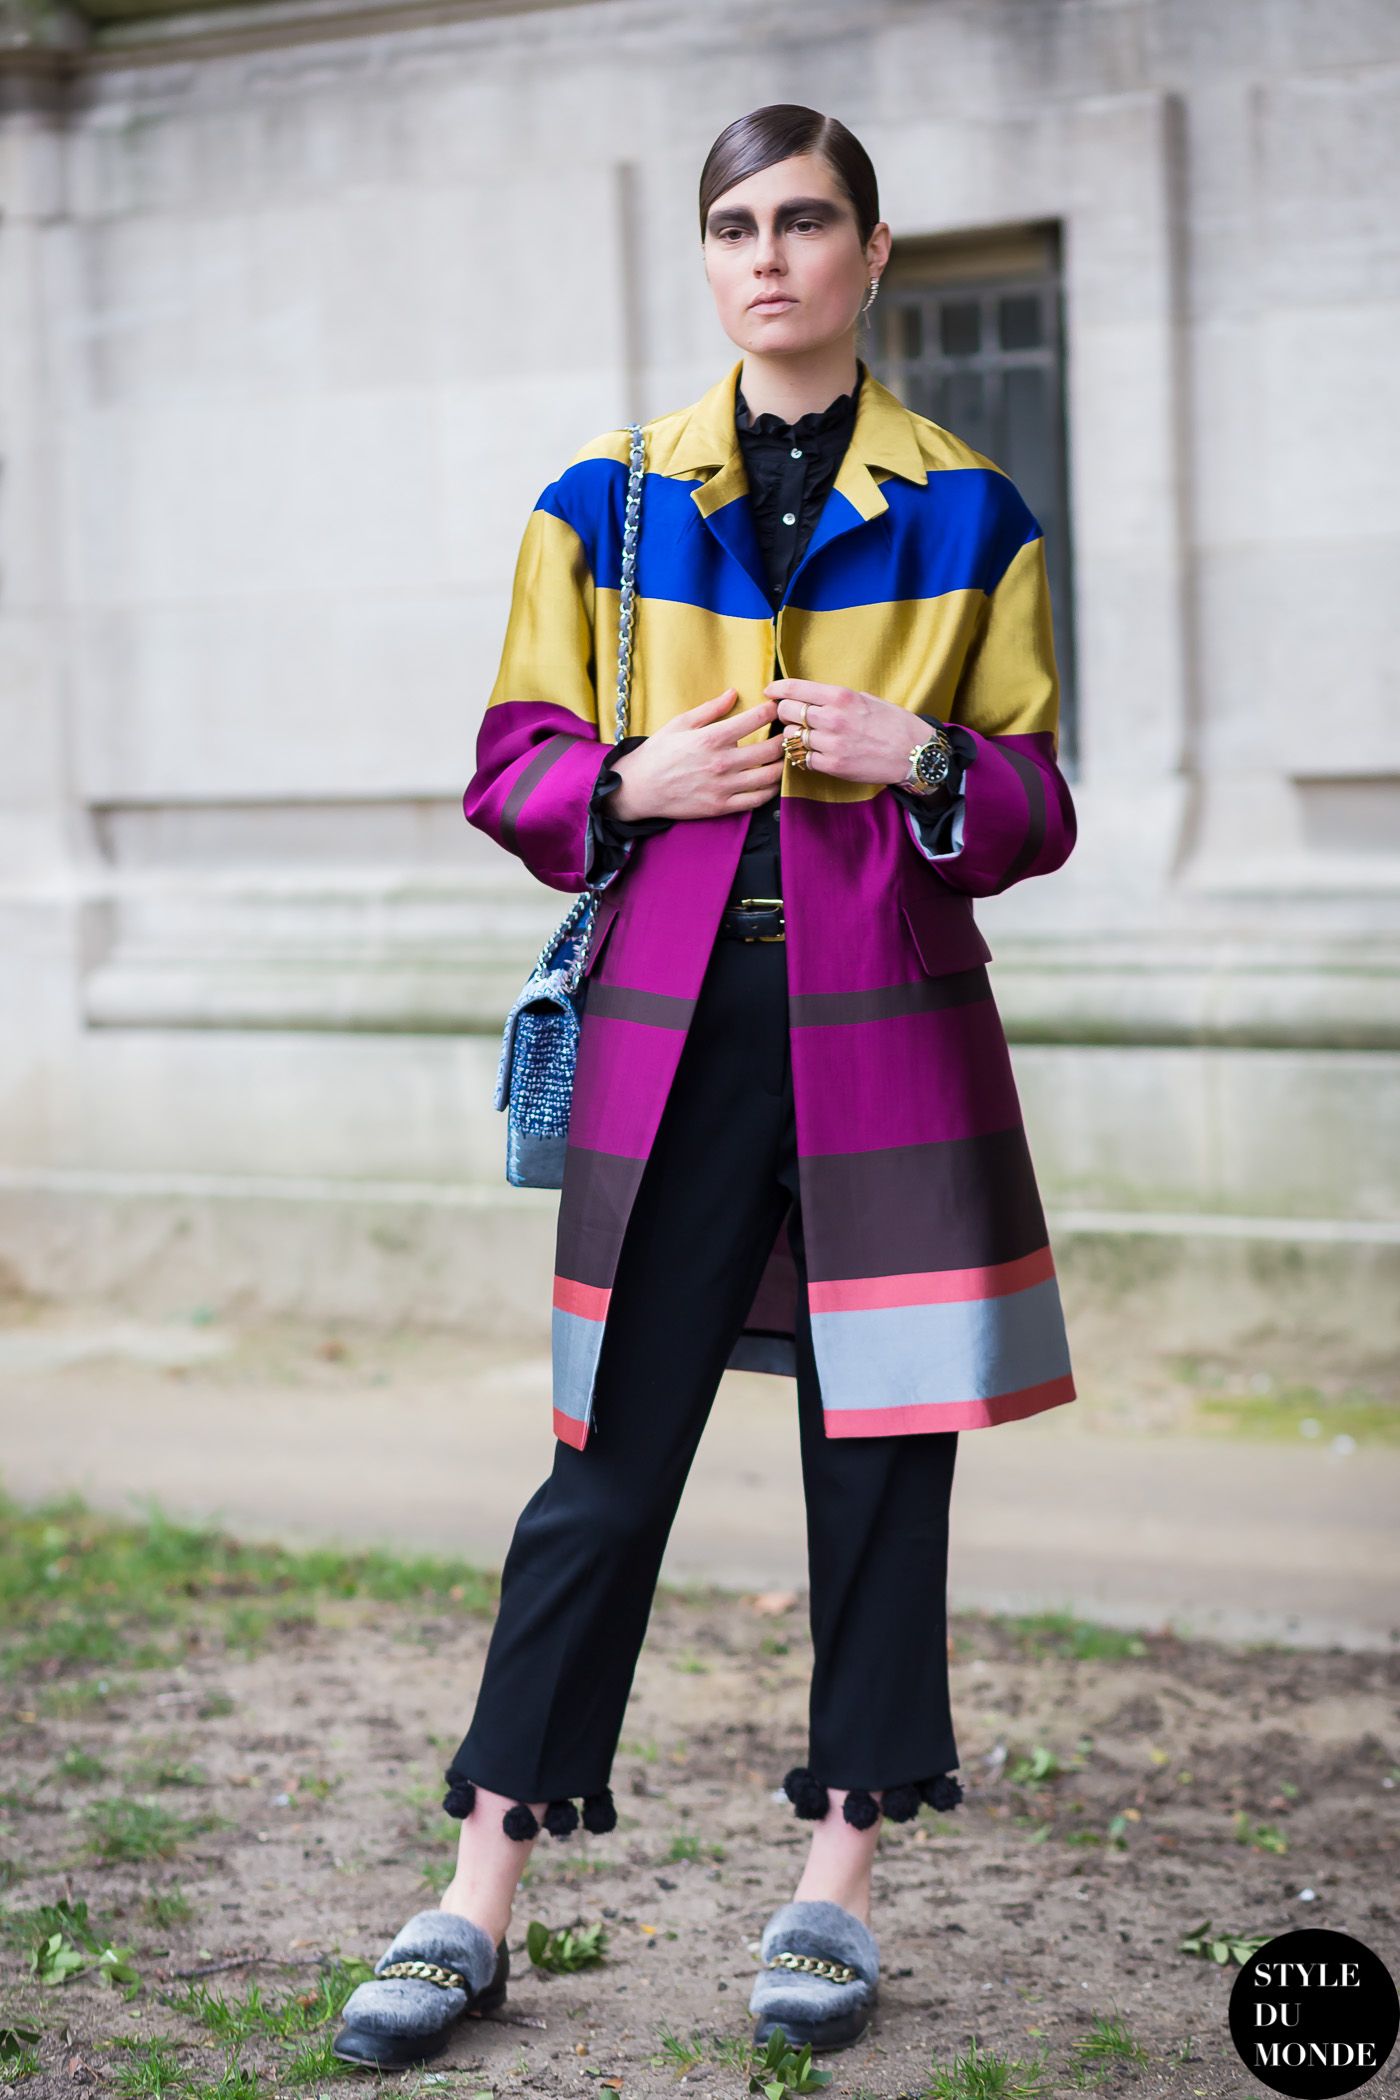 March 2015 Archives - STYLE DU MONDE | Street Style Street Fashion Photos